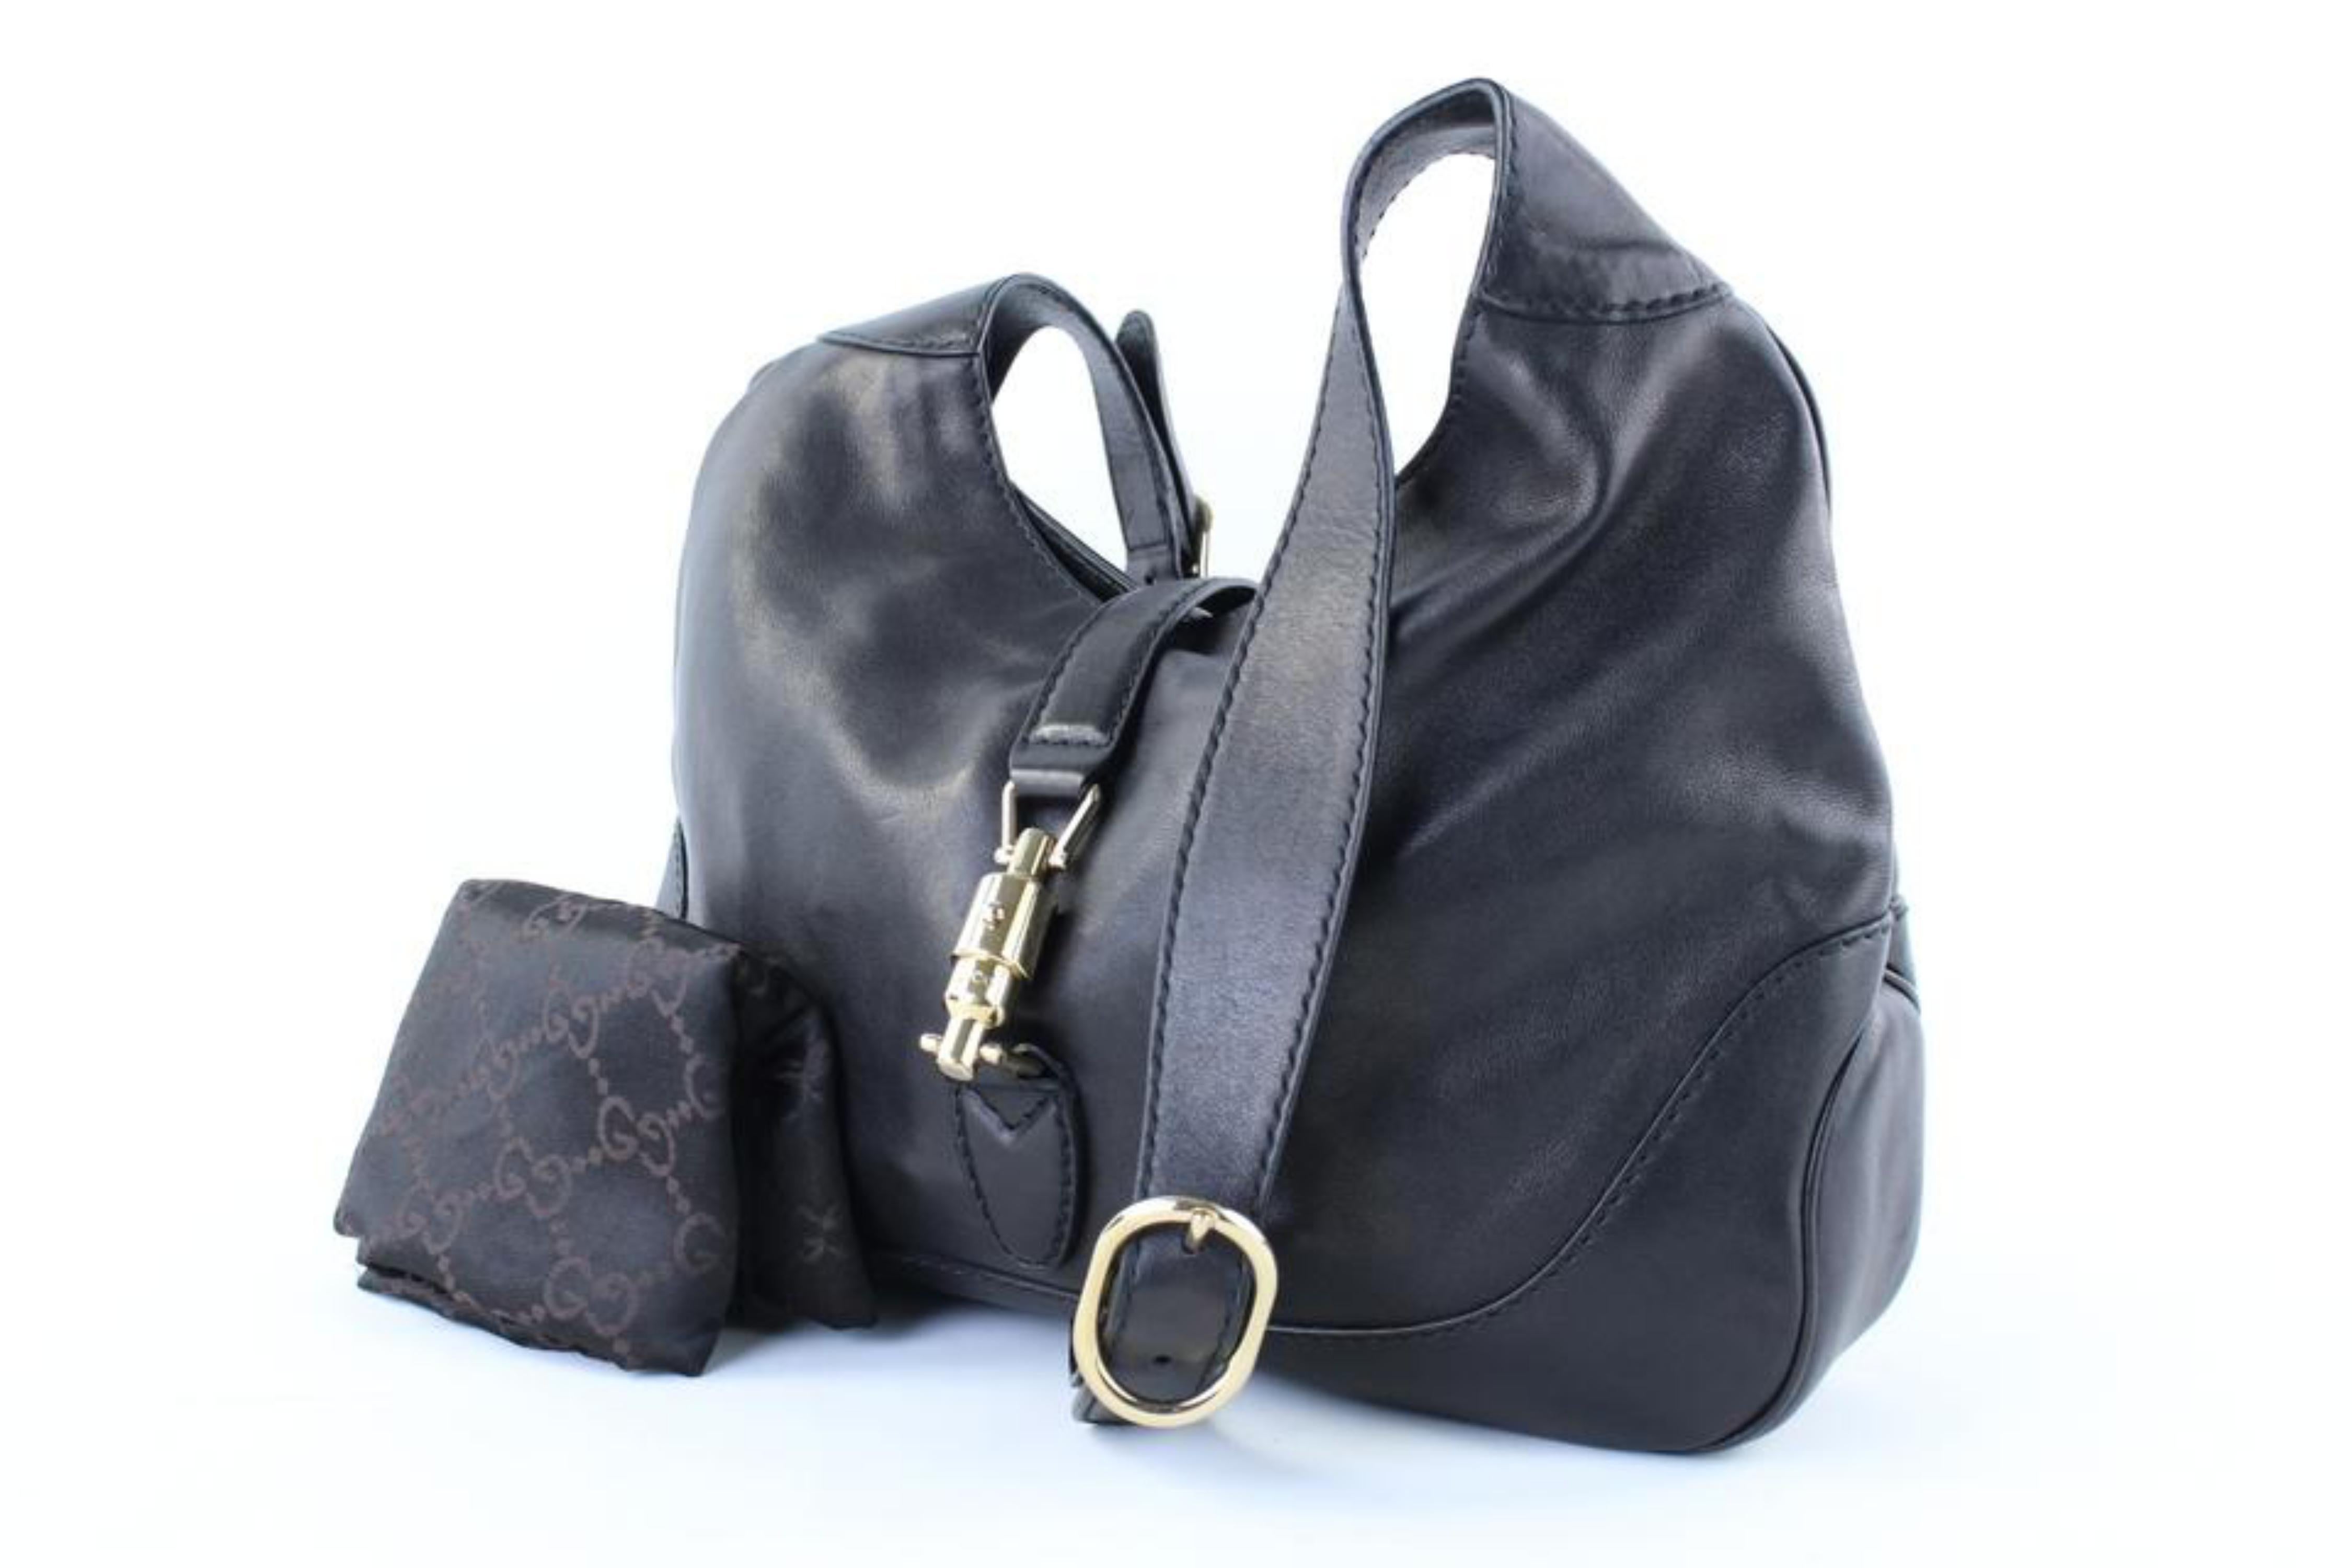 Gucci Jackie Long 10gr1103 Black Leather Hobo Bag In Good Condition For Sale In Forest Hills, NY